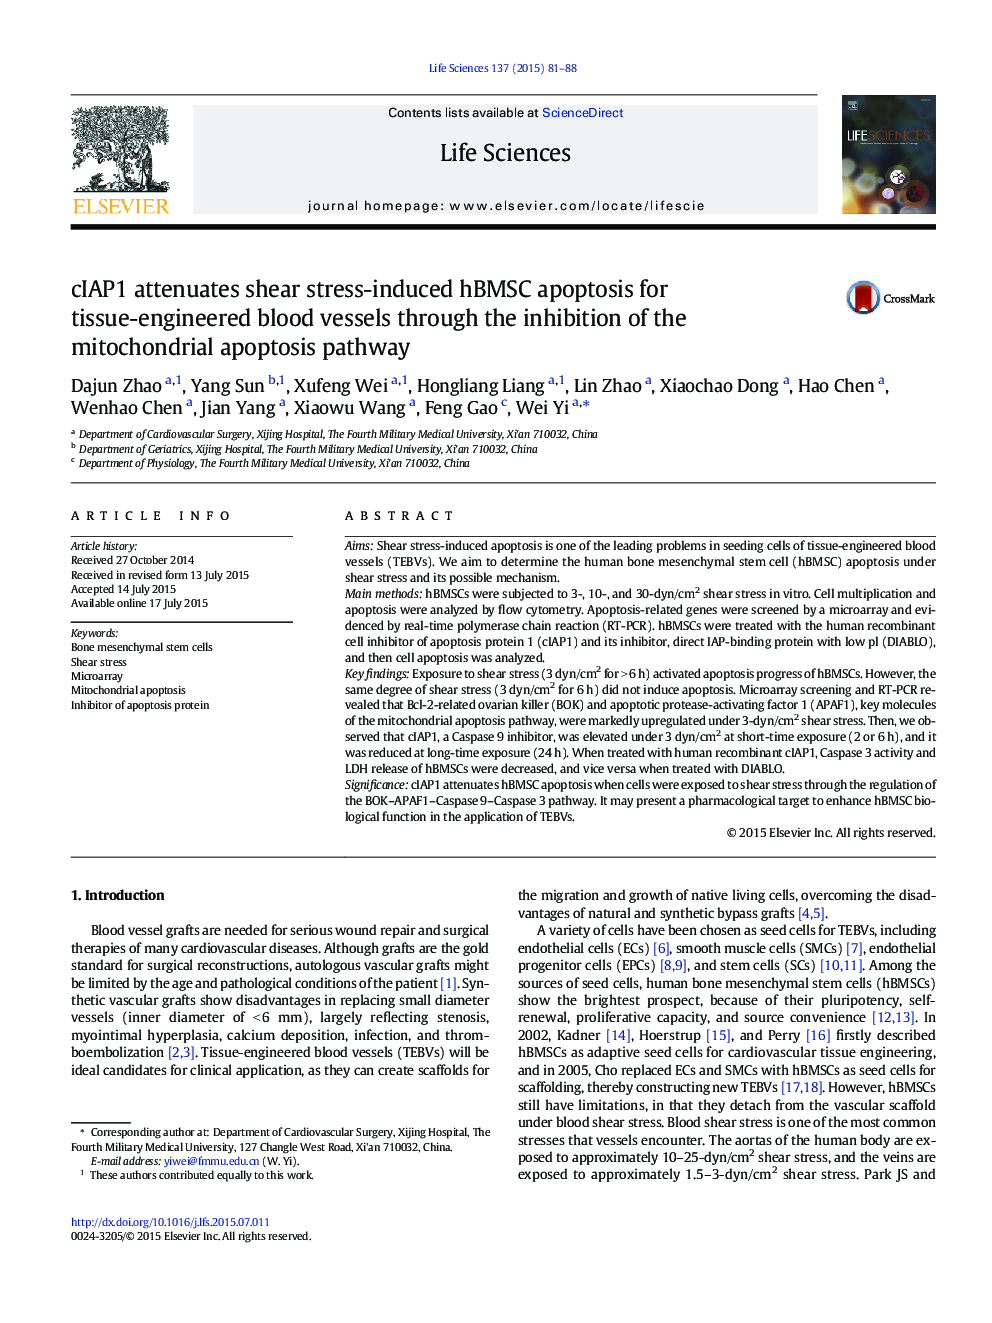 cIAP1 attenuates shear stress-induced hBMSC apoptosis for tissue-engineered blood vessels through the inhibition of the mitochondrial apoptosis pathway